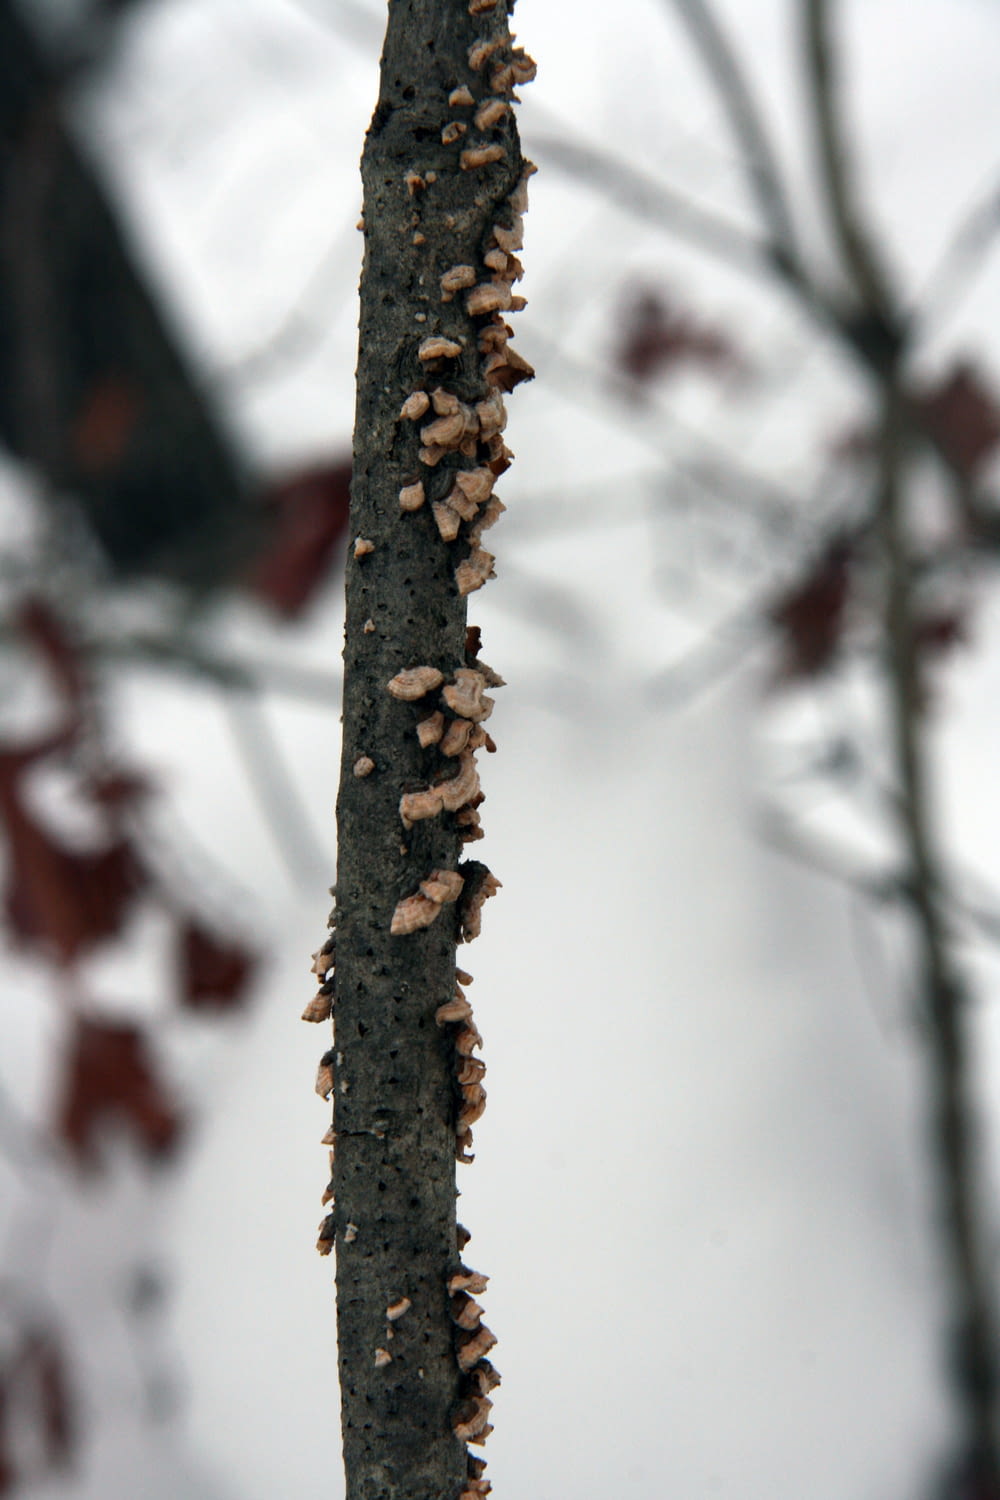 a close up of a tree branch with a bunch of mushrooms growing on it